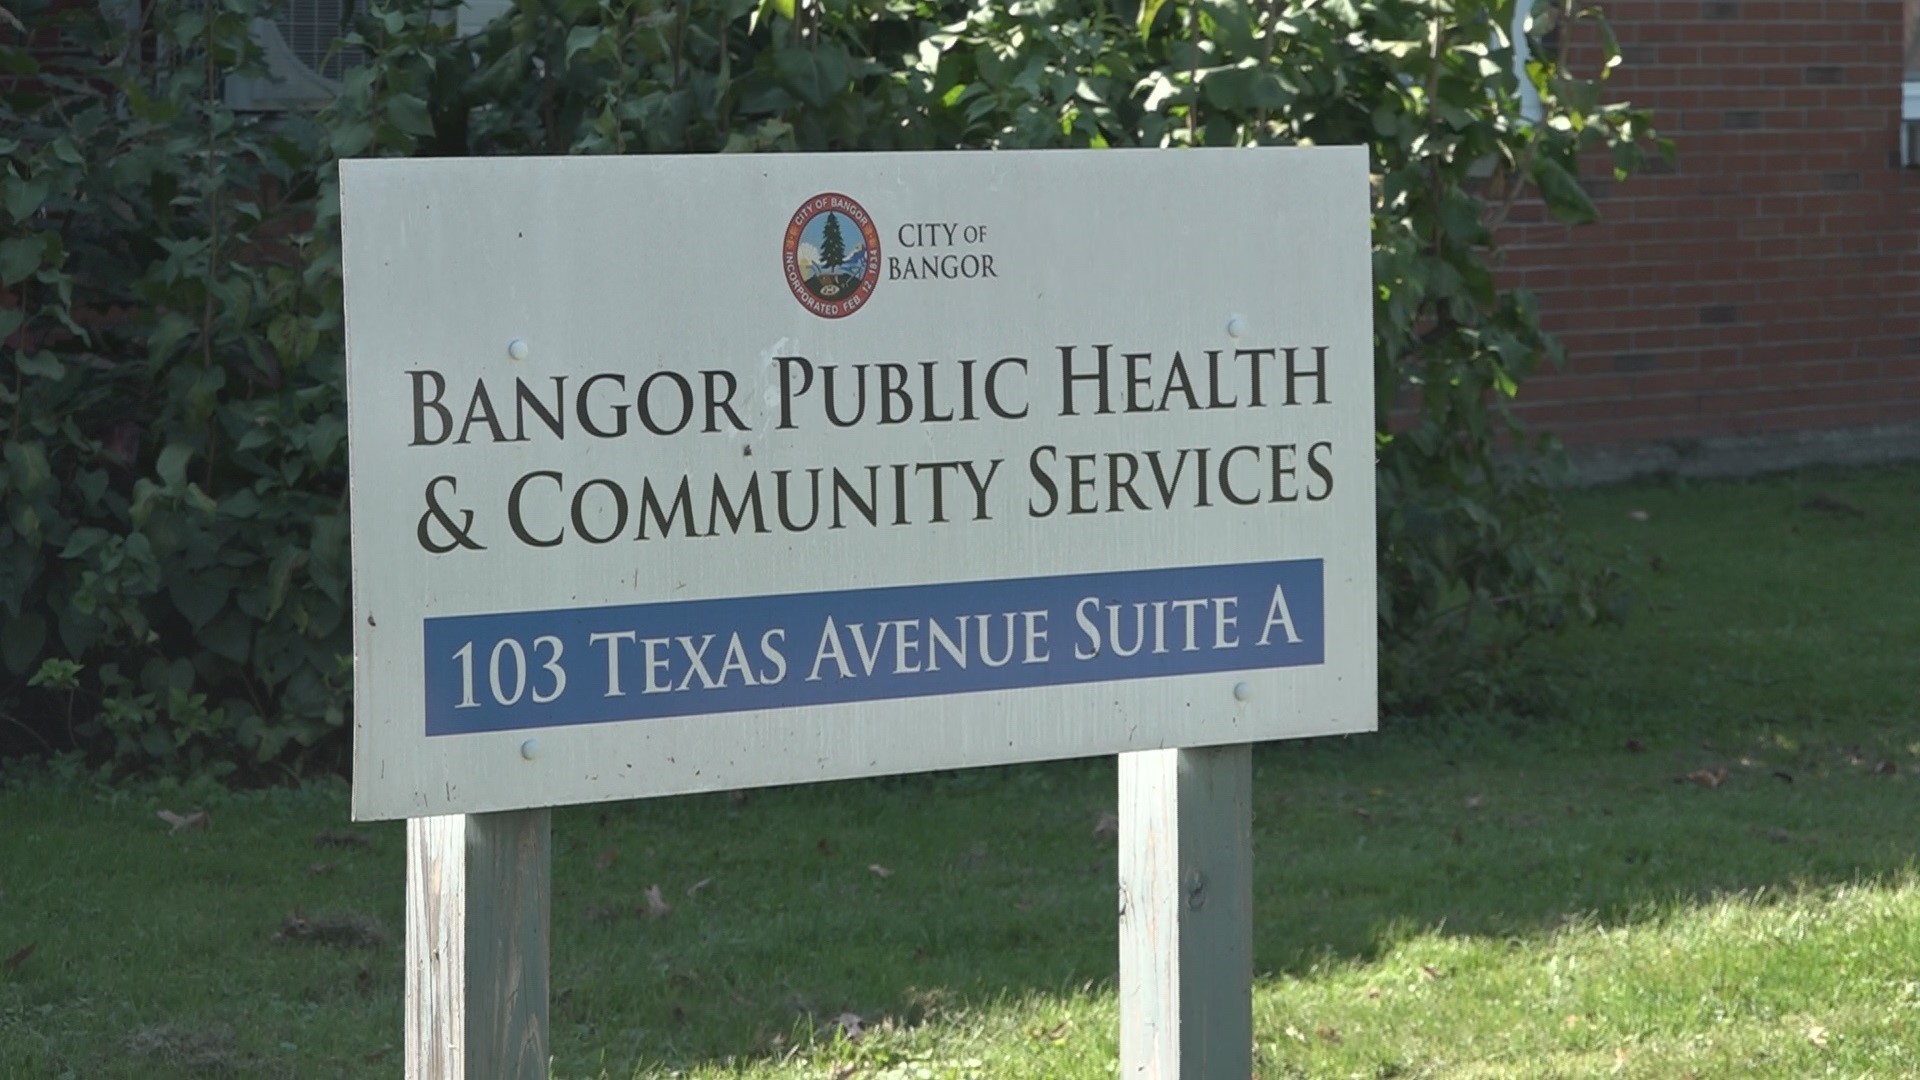 Patty Hamilton, who heads Bangor Public Health and Community Services, will be replaced by longtime public health professional Jennifer Gunderman.